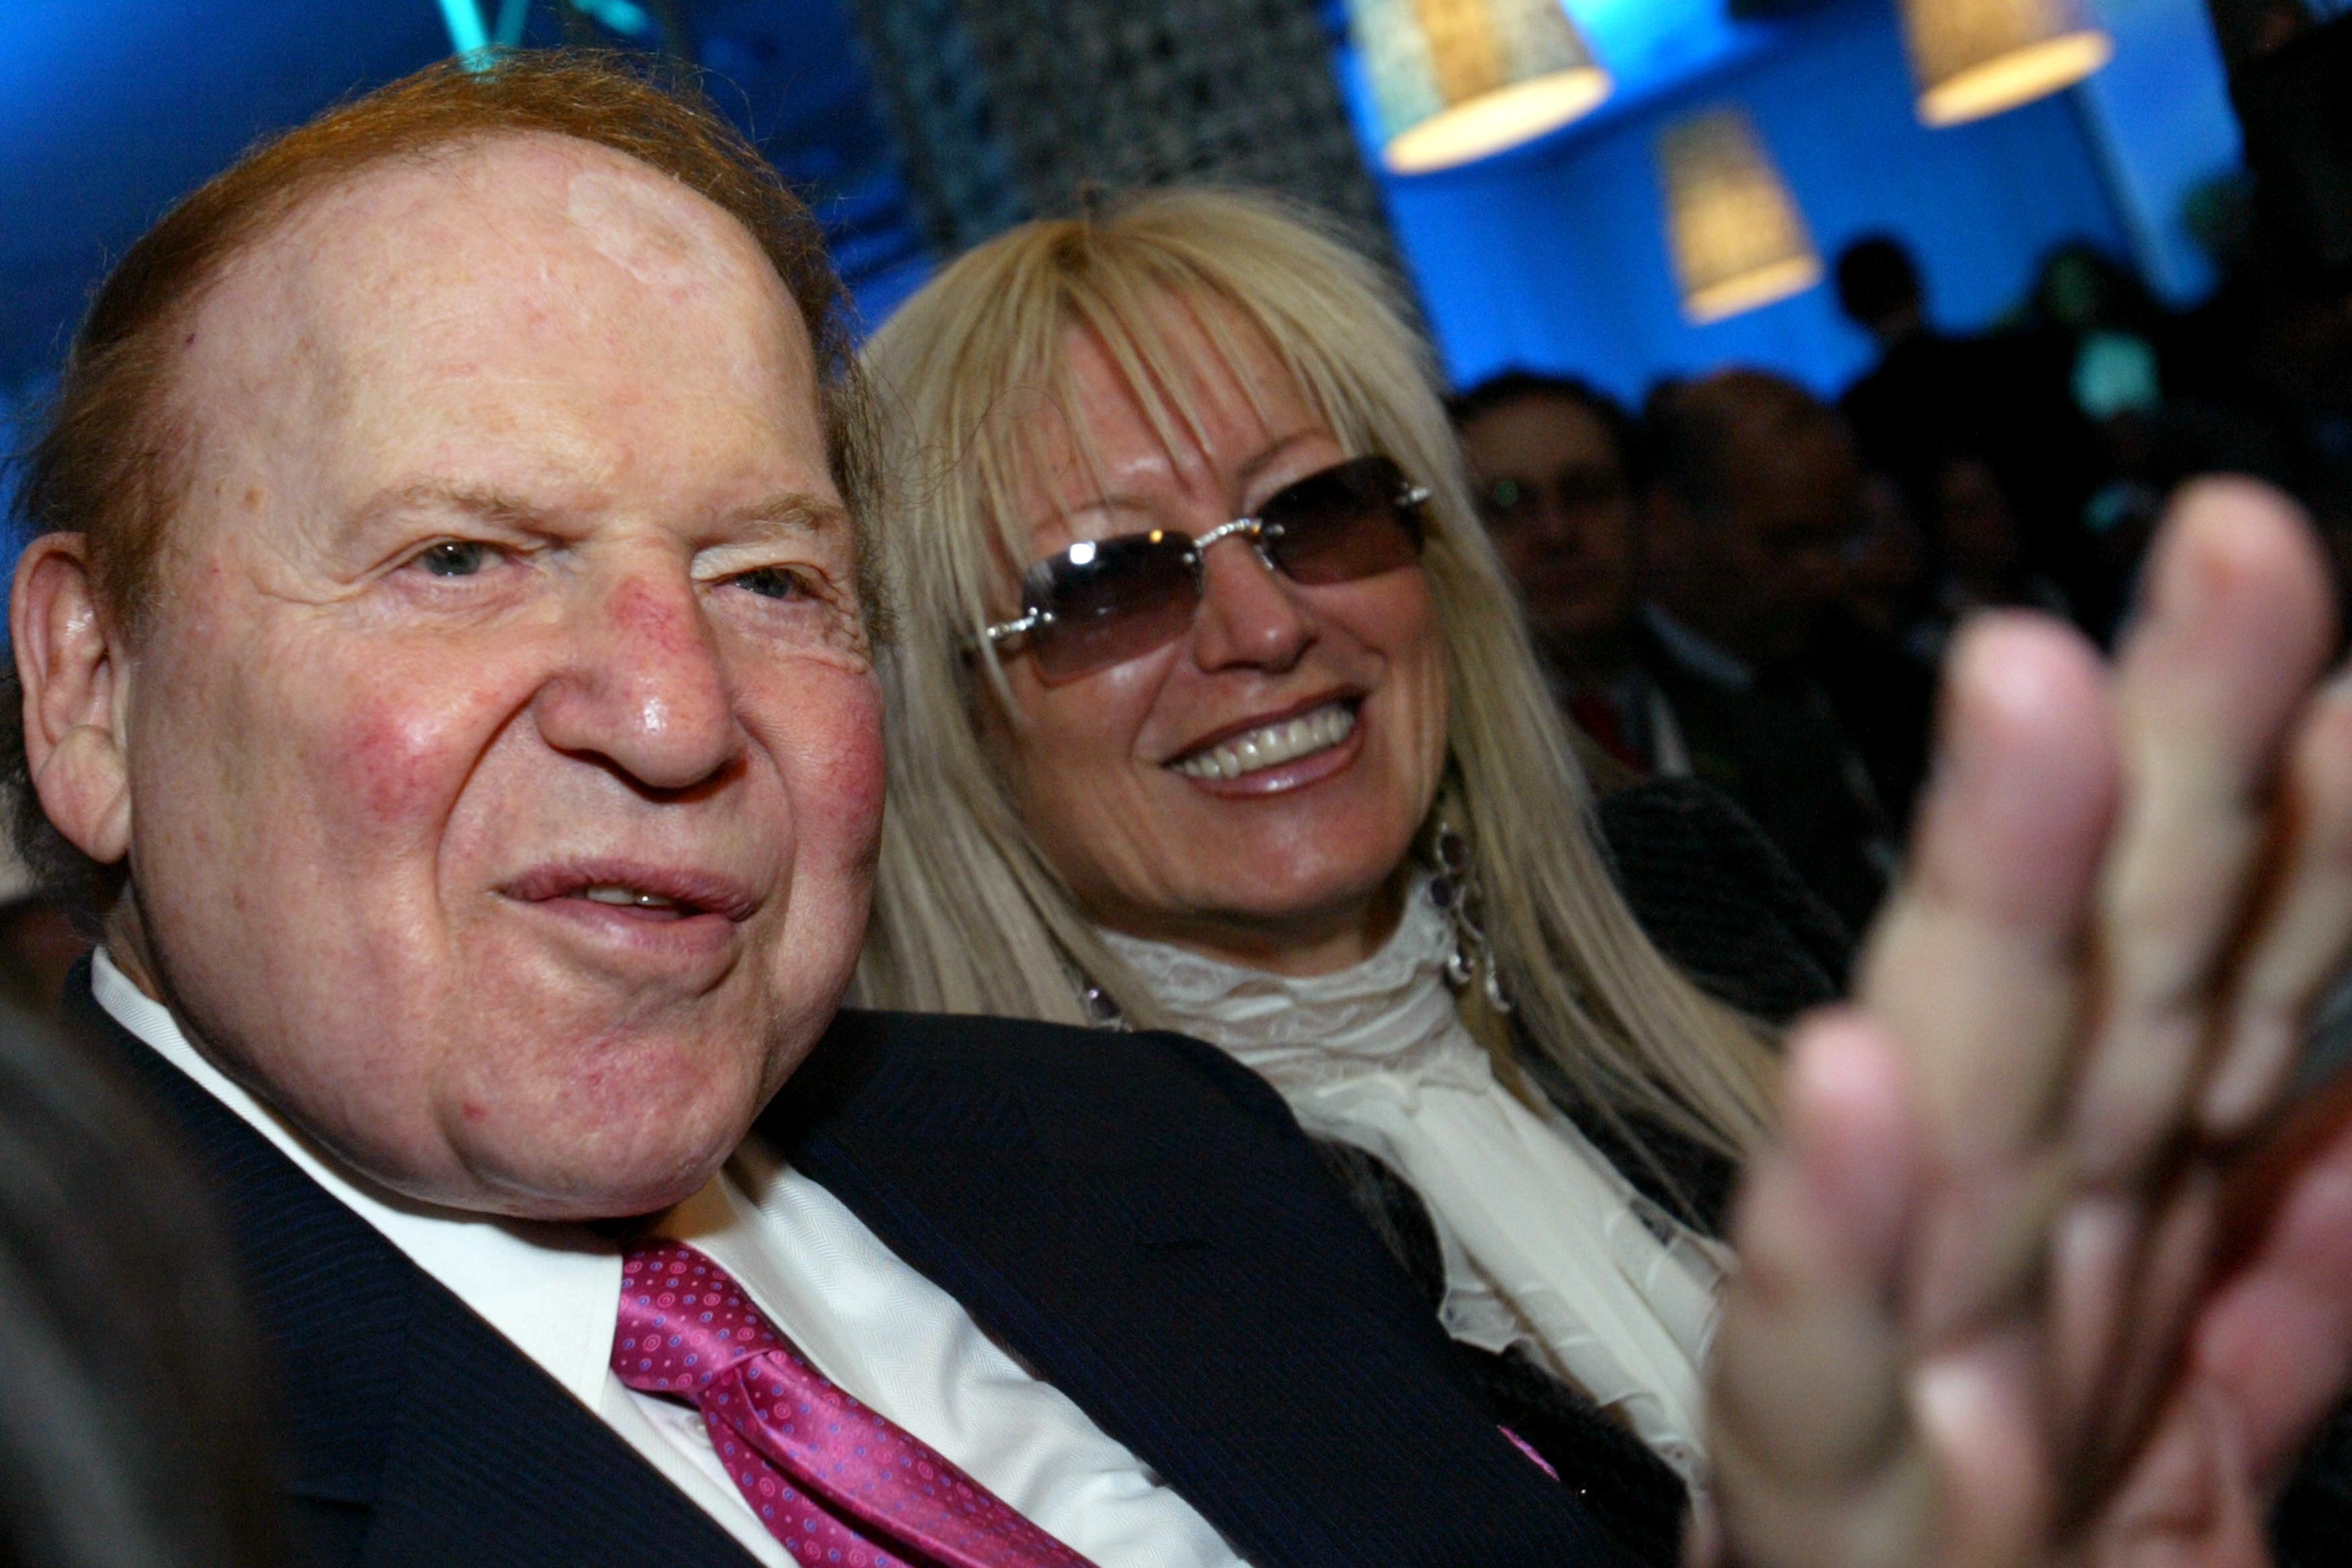 Sheldon Adelson's backing of Republican candidates and pro-Israel causes have garnered widespread media attention this campaign. (Olivier Fitoussi /FLASH90)